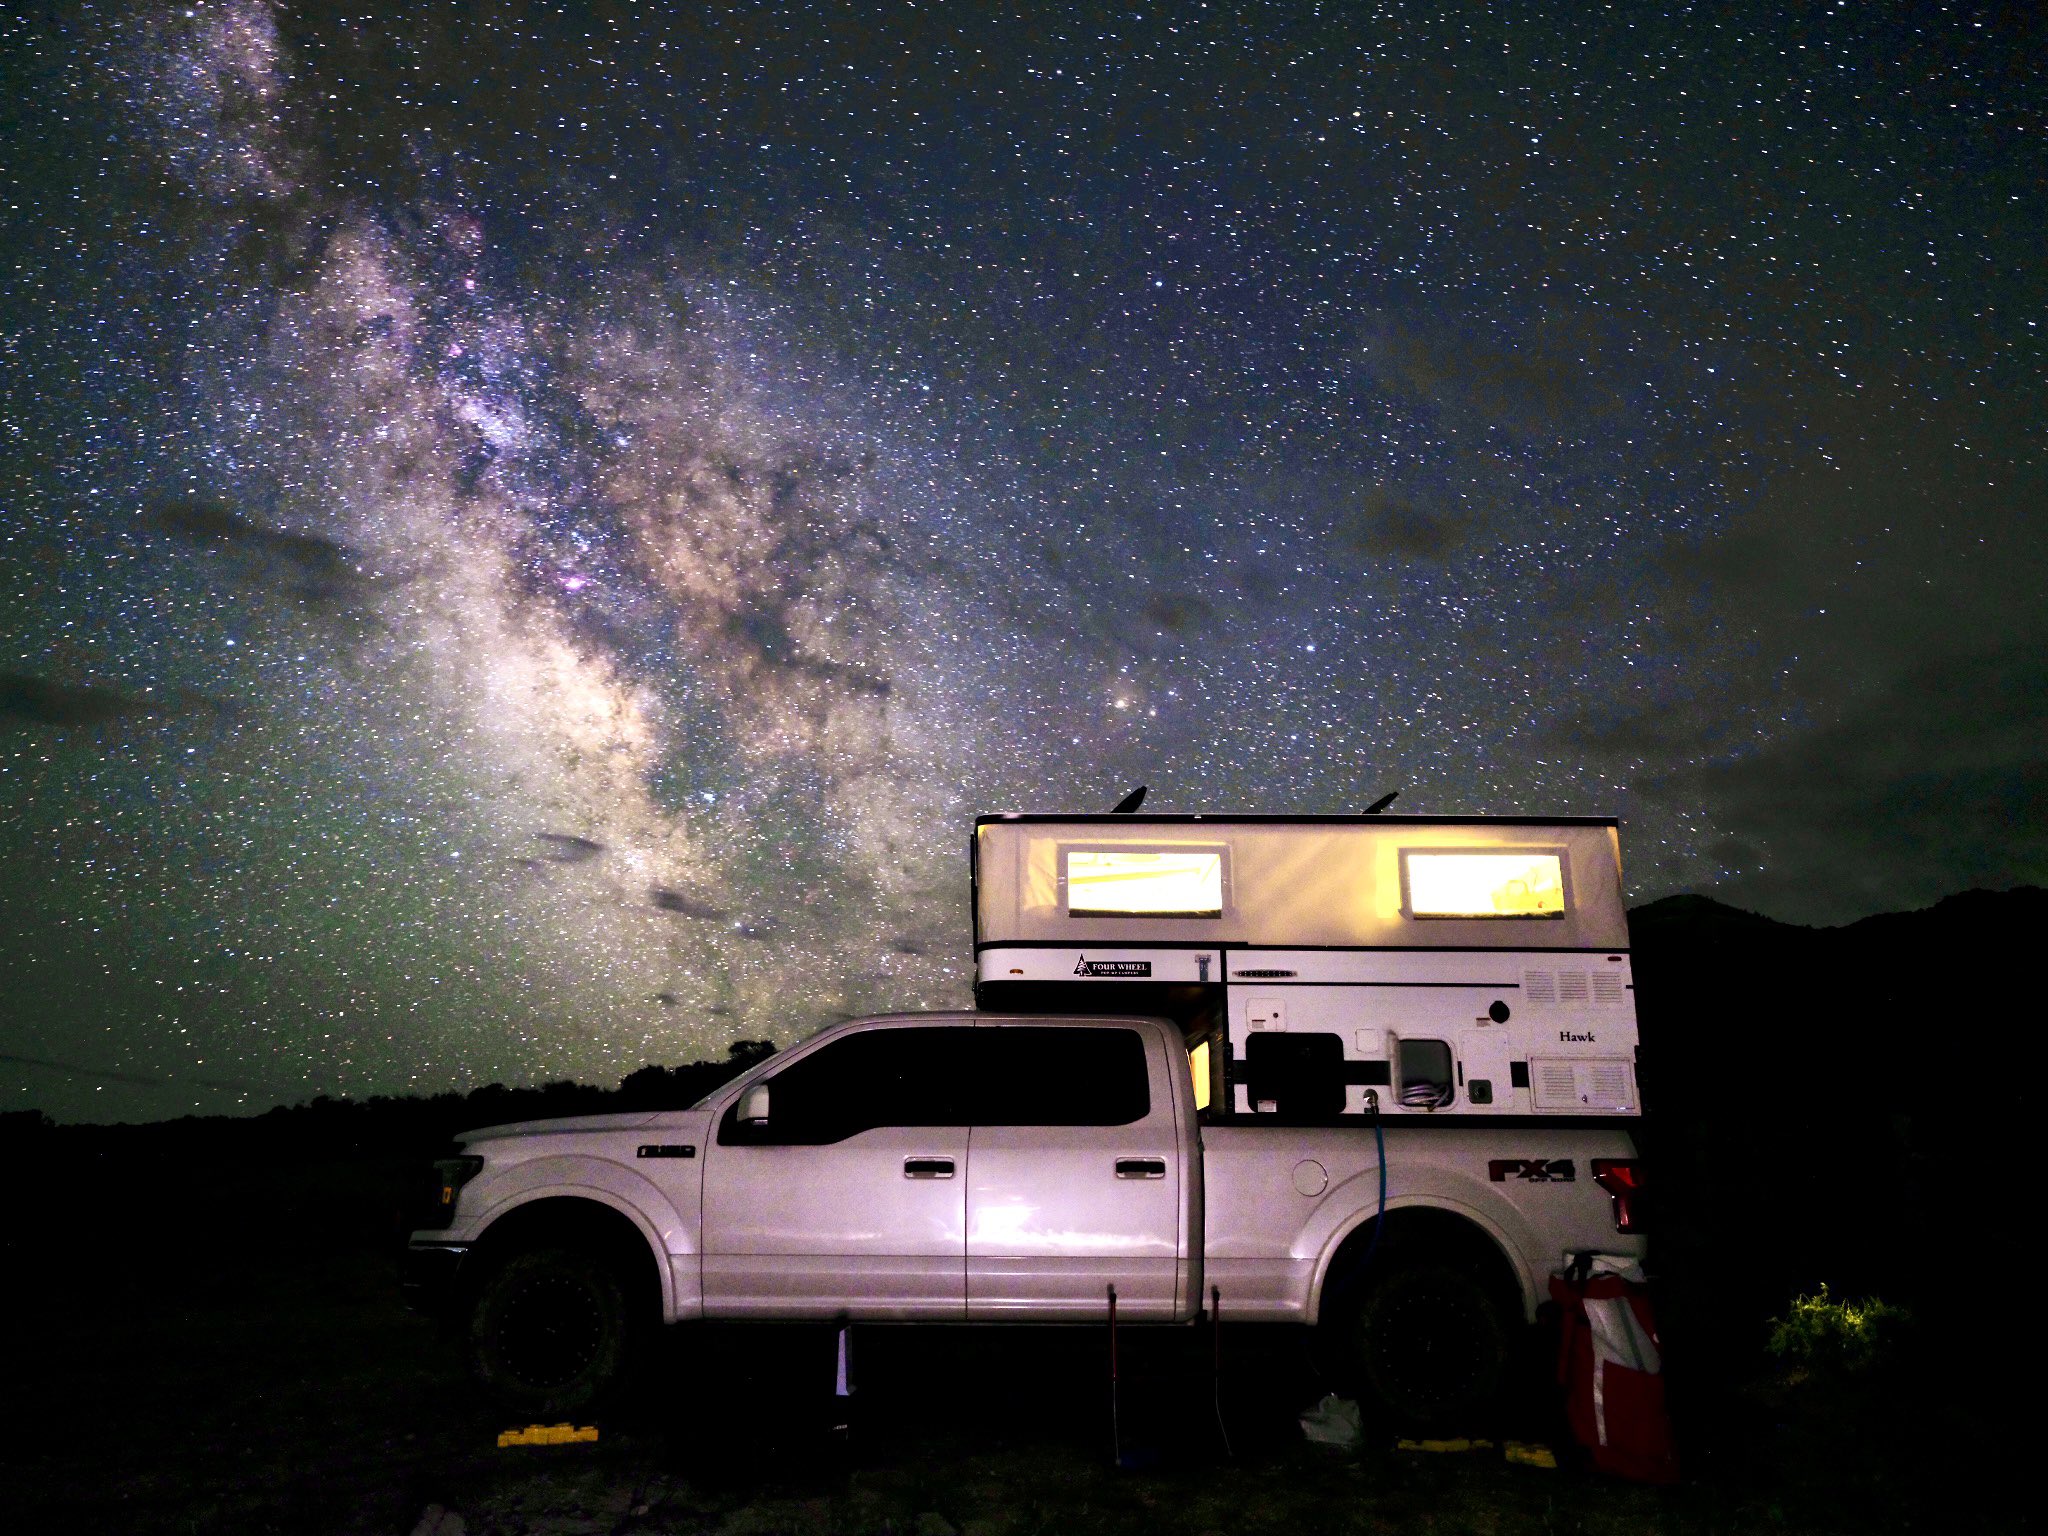 Stuart Palley Rig parked under the stars